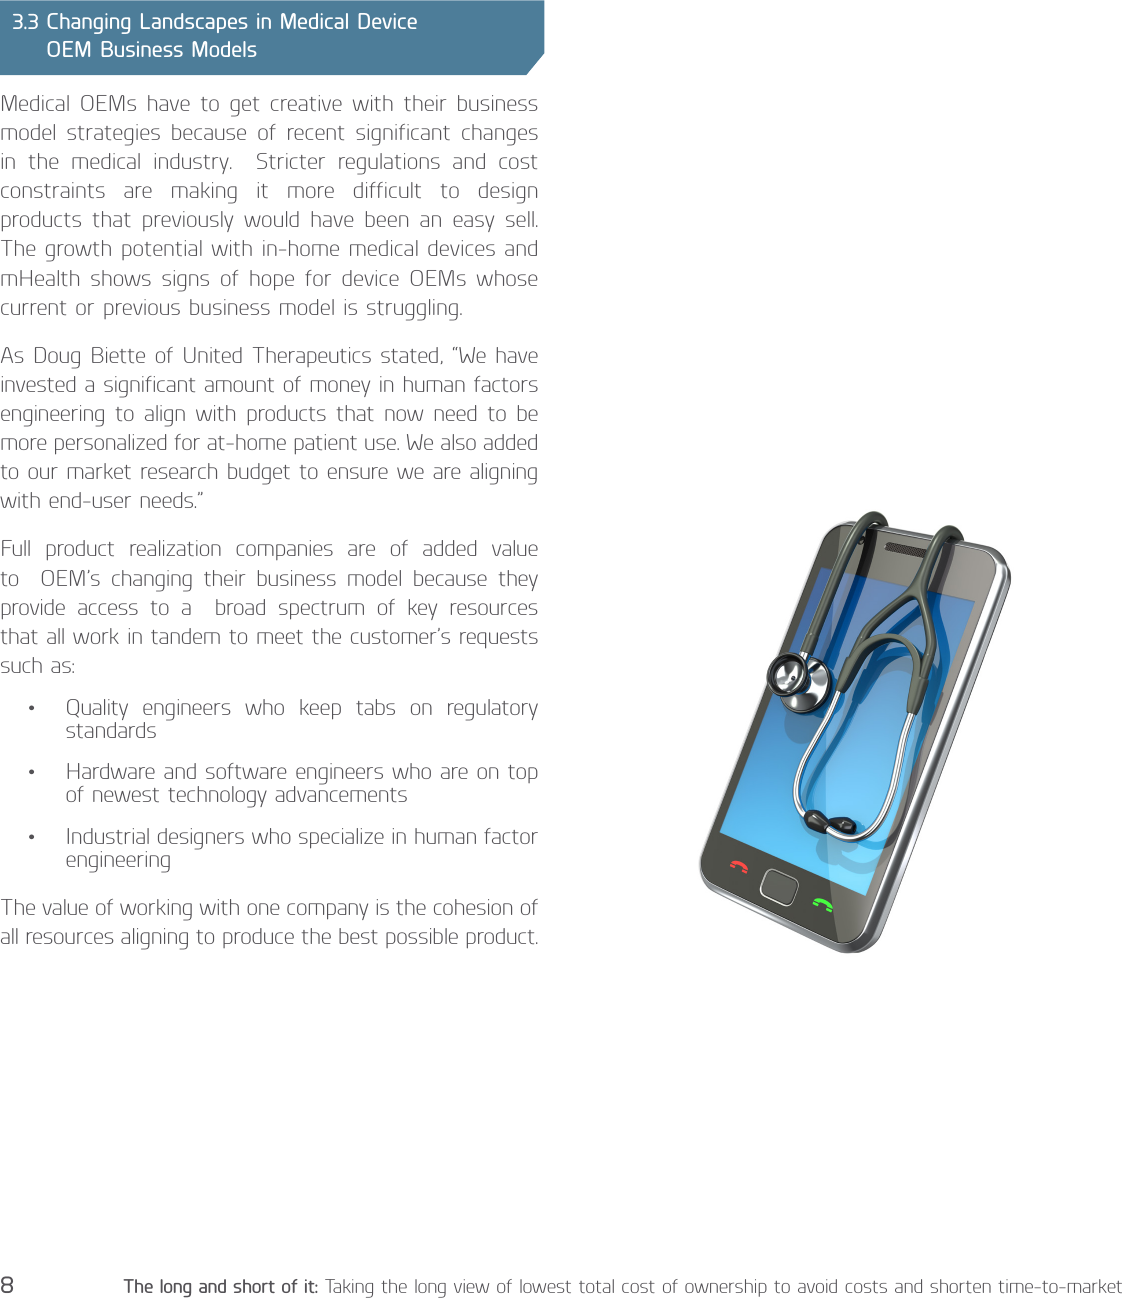 Page 10 of 12 - Addressing-the-challenges-of-home-medical-devices